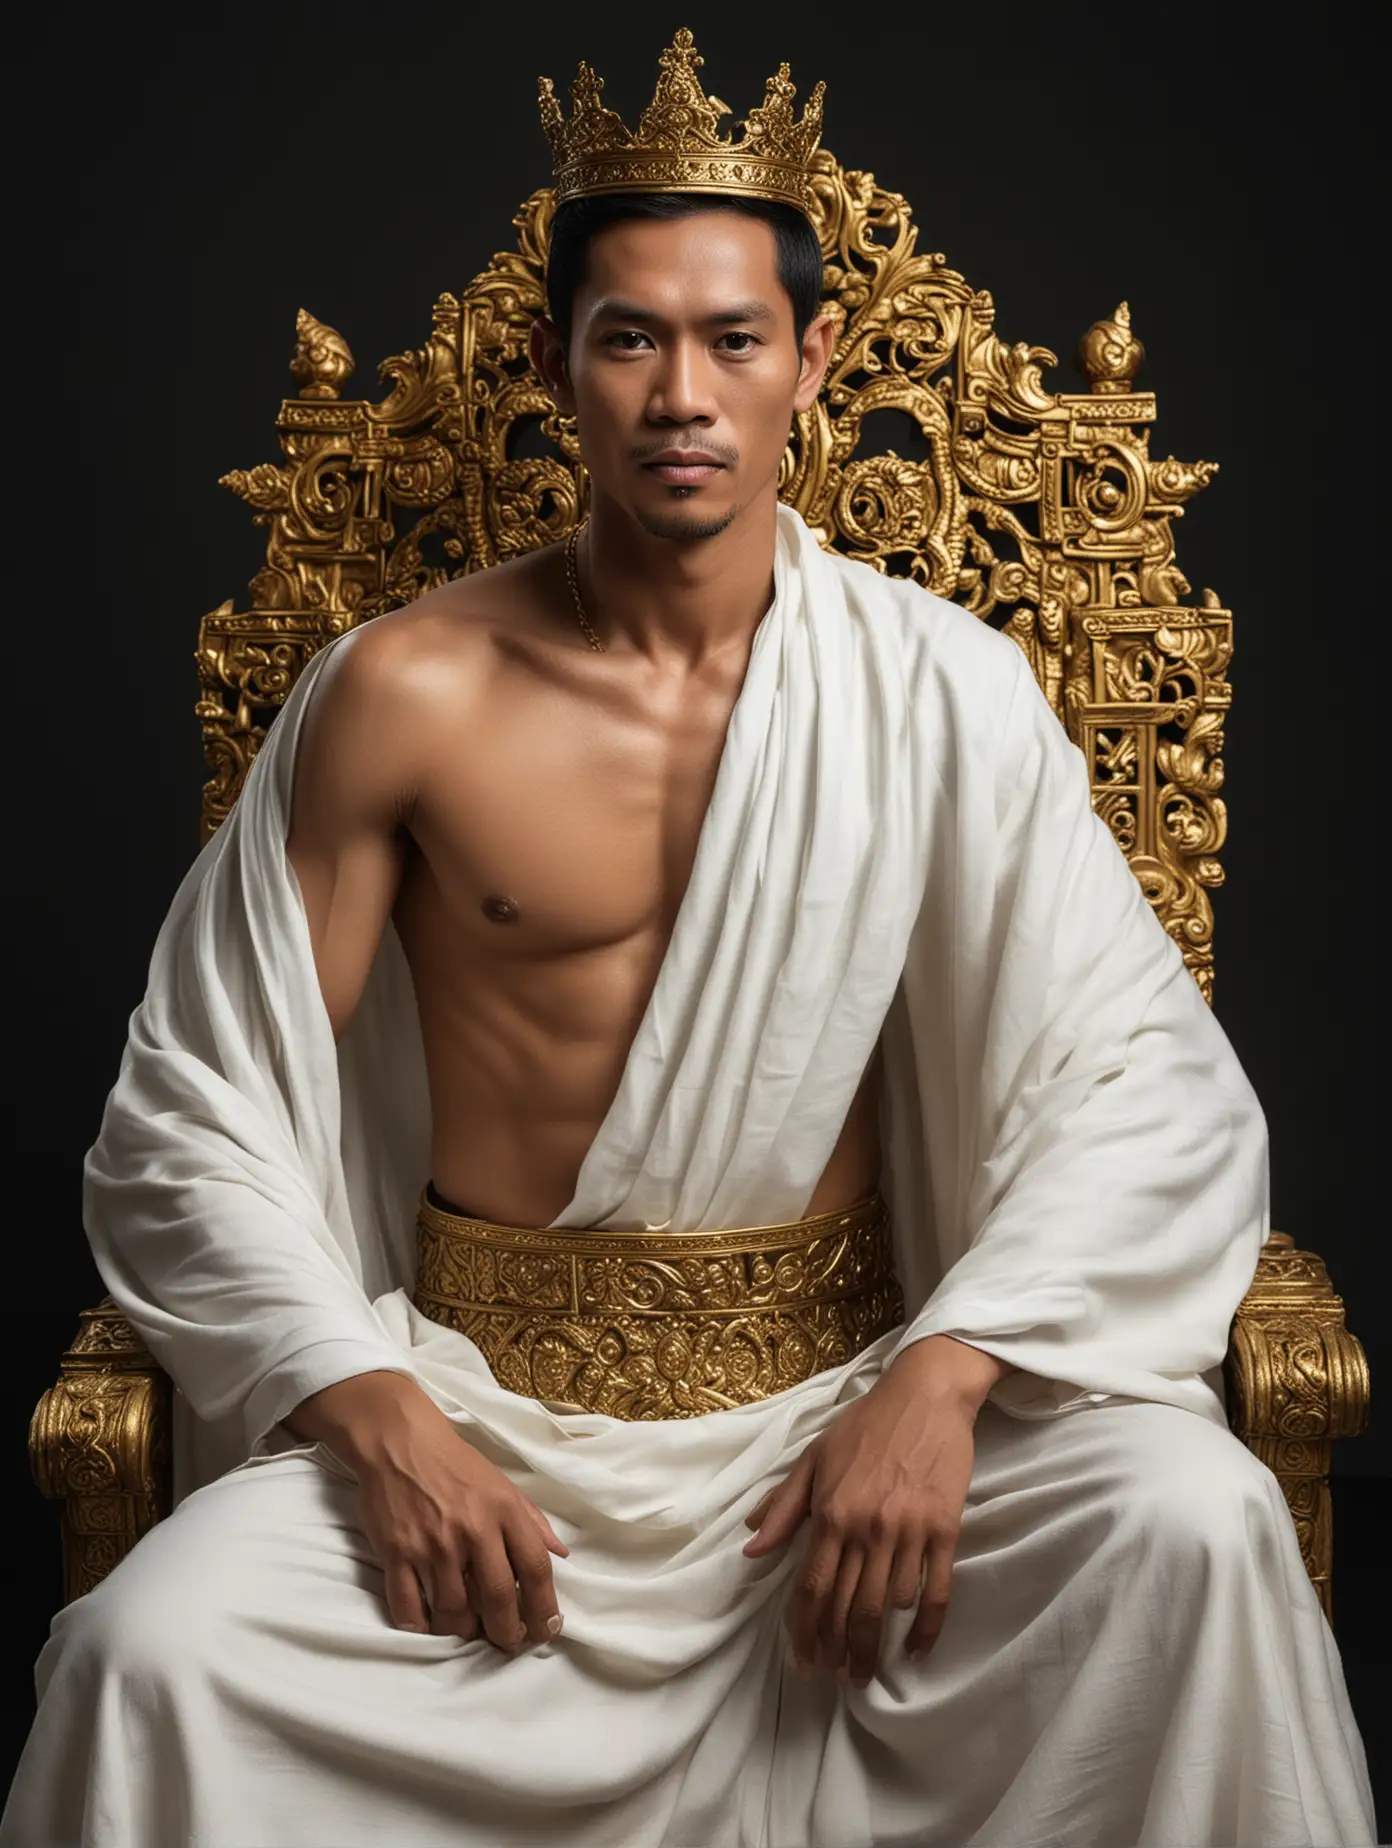 The Indonesian male king is 40 years old and has skinny white skin, very handsome, shirtless, wearing a long white cloth, sitting on a gold and white throne. black background